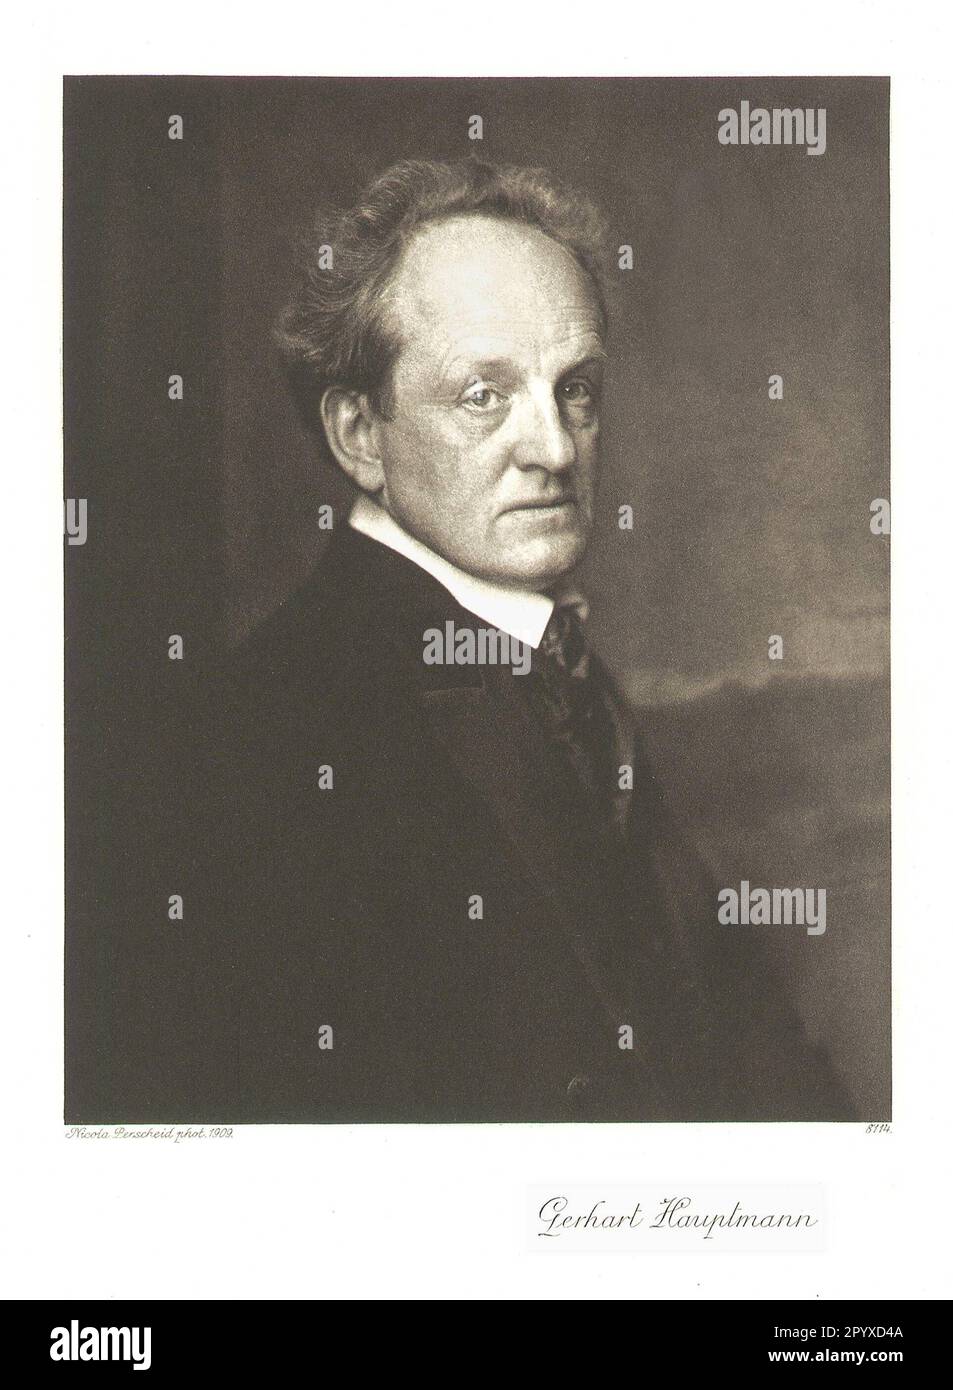 Gerhart Hauptmann (1862-1946), German writer and Nobel Prize winner (1912). Photograph by Nicola Perscheid from 1909. Photo: Heliogravure, Corpus Imaginum, Hanfstaengl Collection. [automated translation] Stock Photo